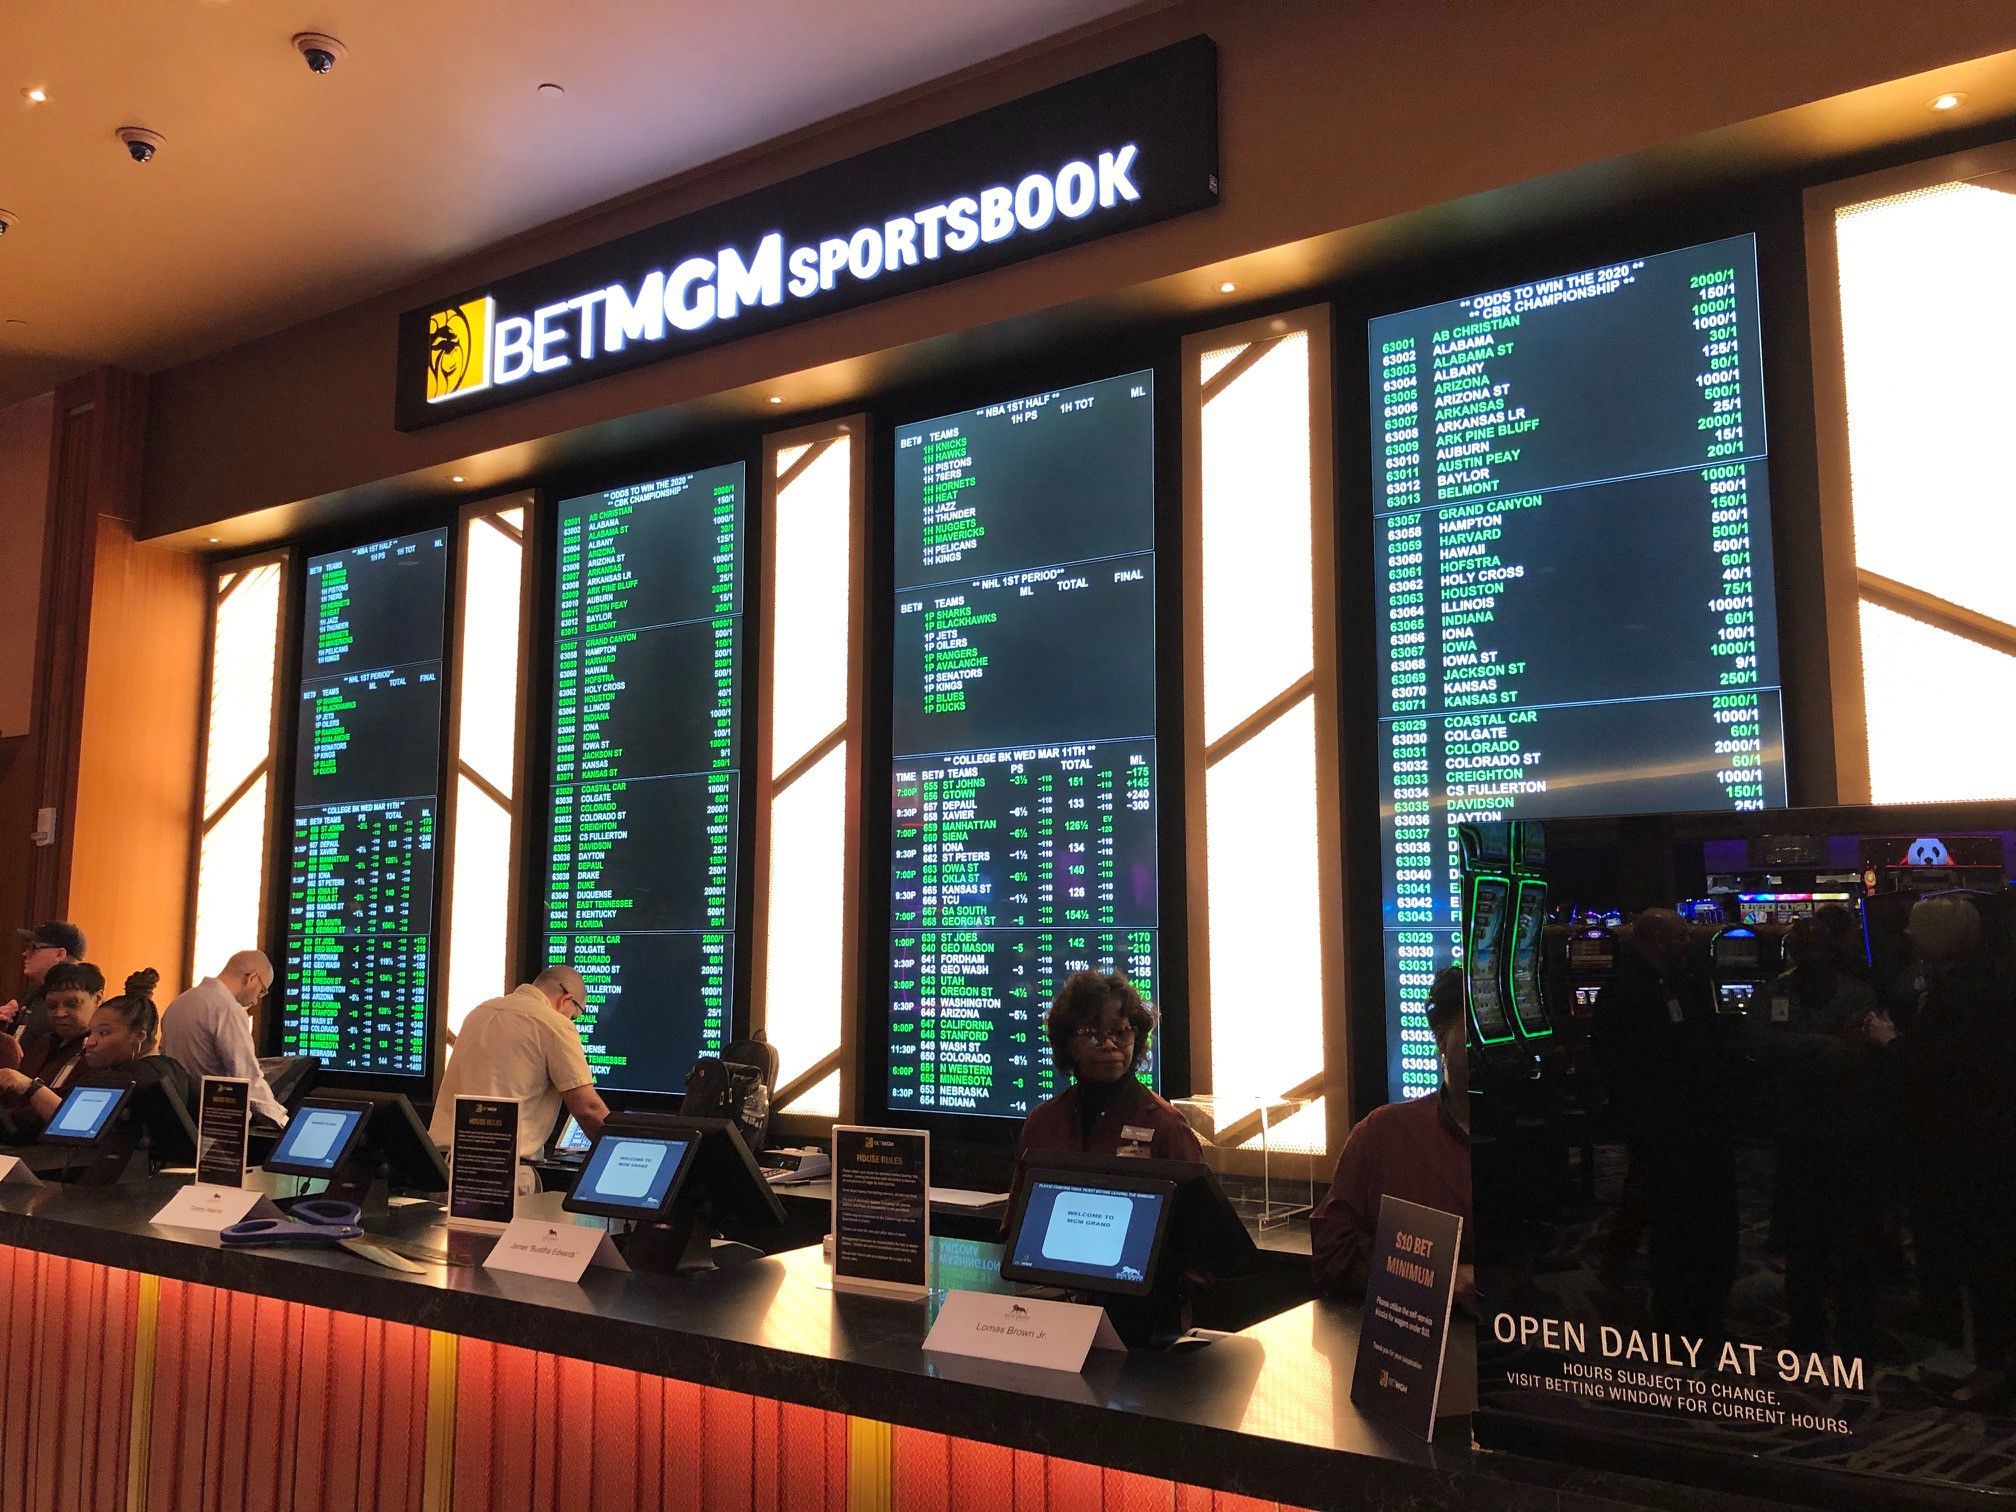 The very first in-person Michigan sports bet at MGM was for